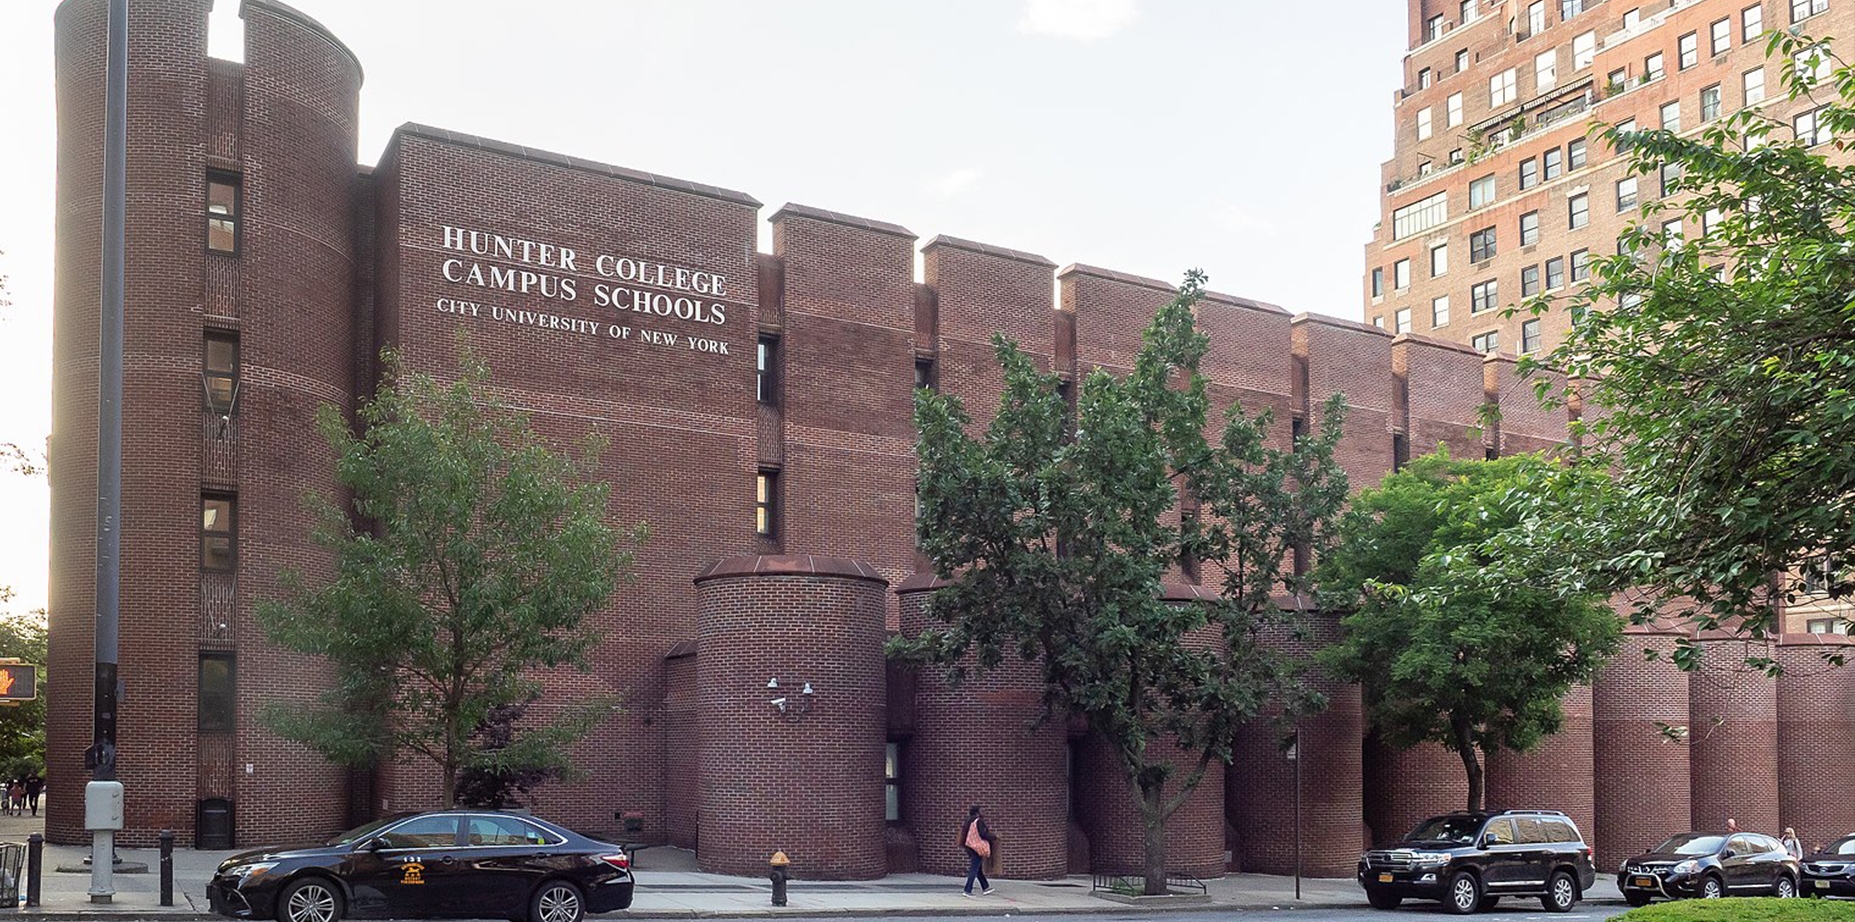 The exterior of the Hunter High School in Manhattan. (Wikimedia Commons)